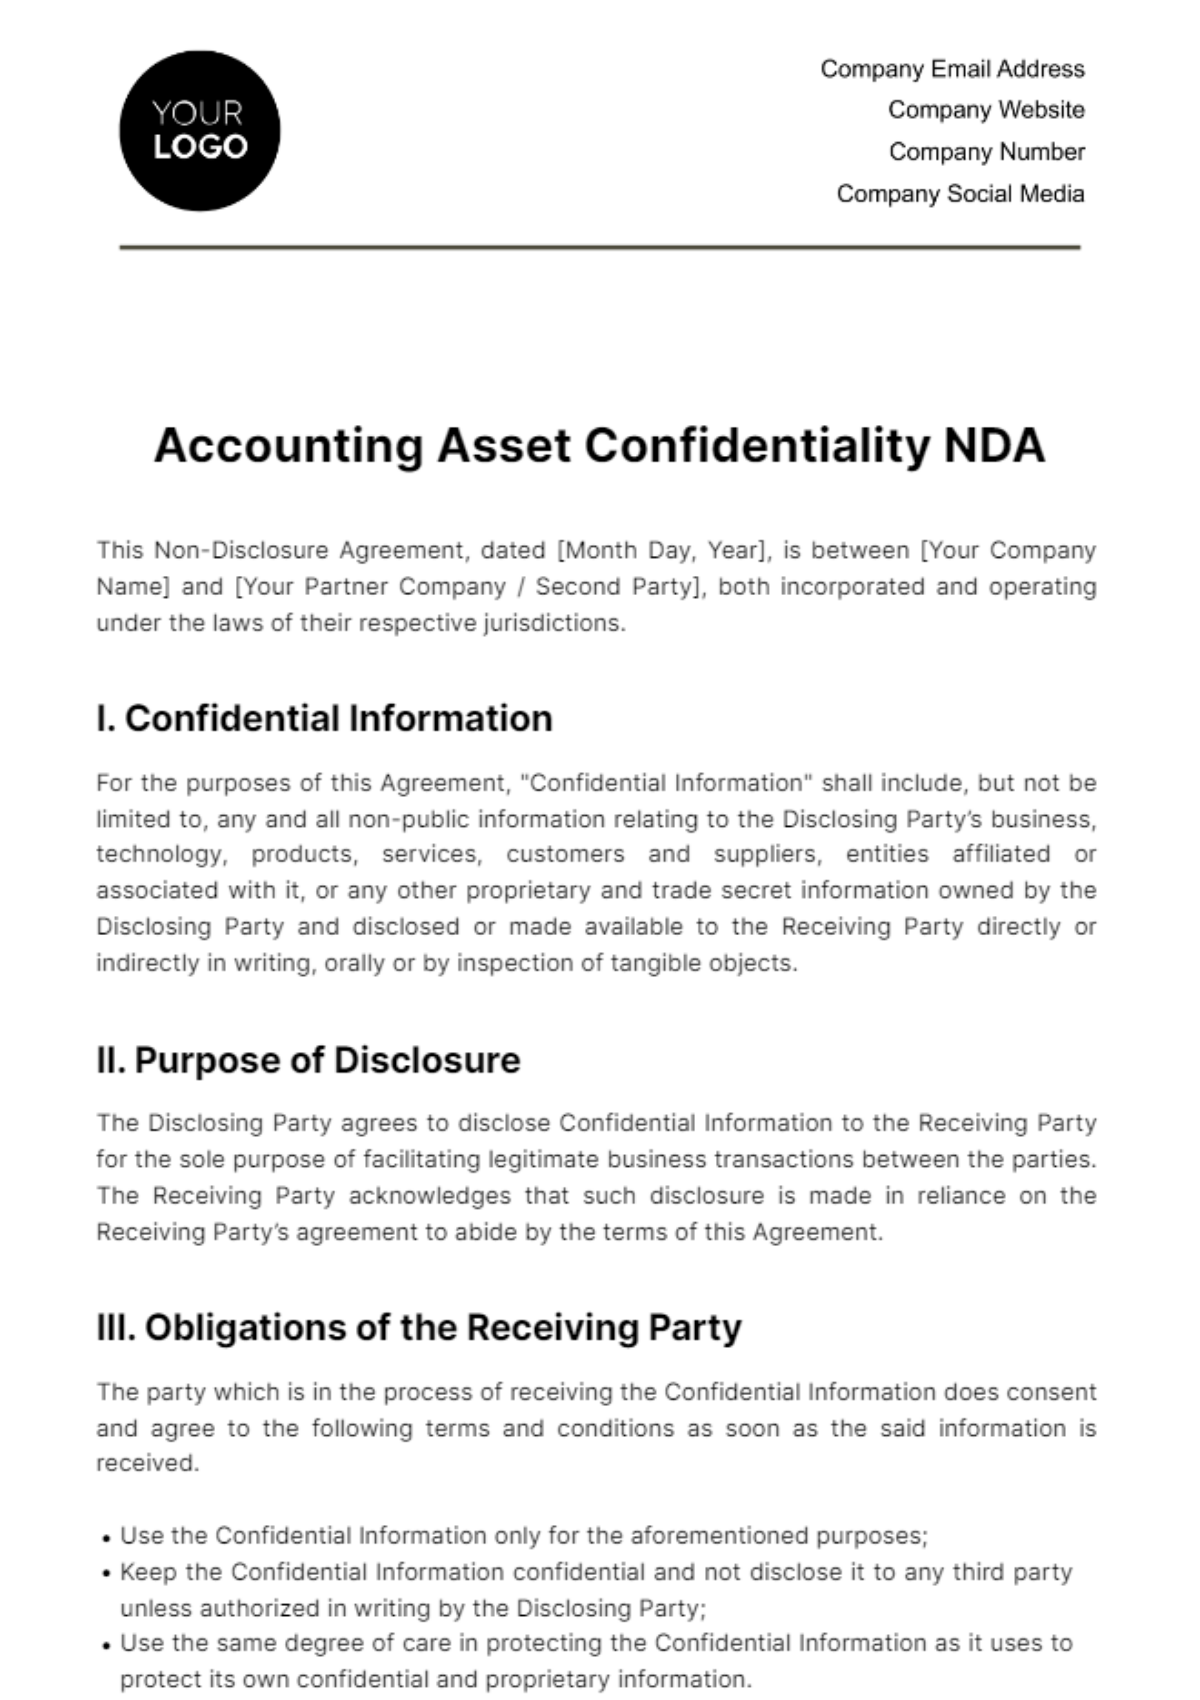 Free Accounting Asset Confidentiality NDA Template